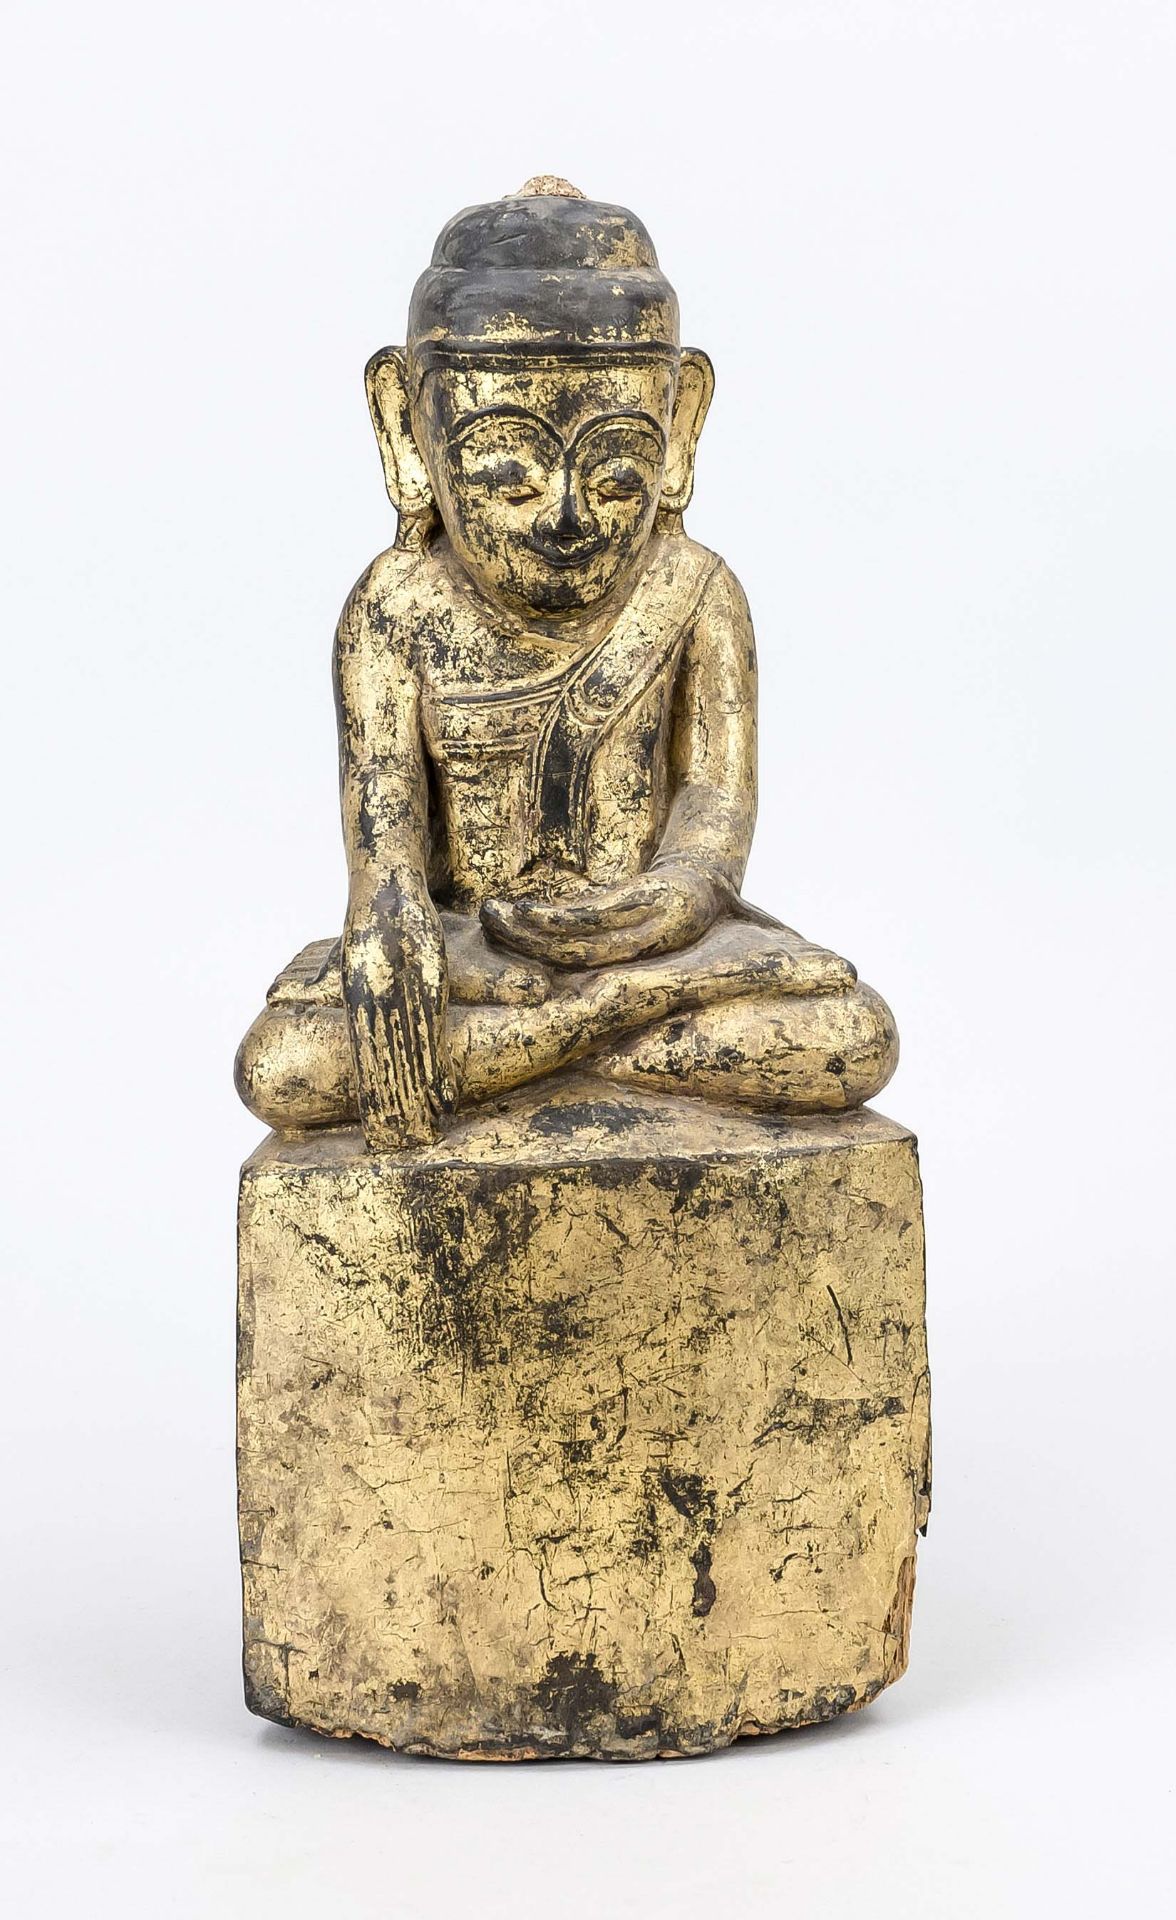 Buddha, Burma/Myanmar, probably 19th century, gilded wood/gold lacquer. Gilding heavily rubbed, base